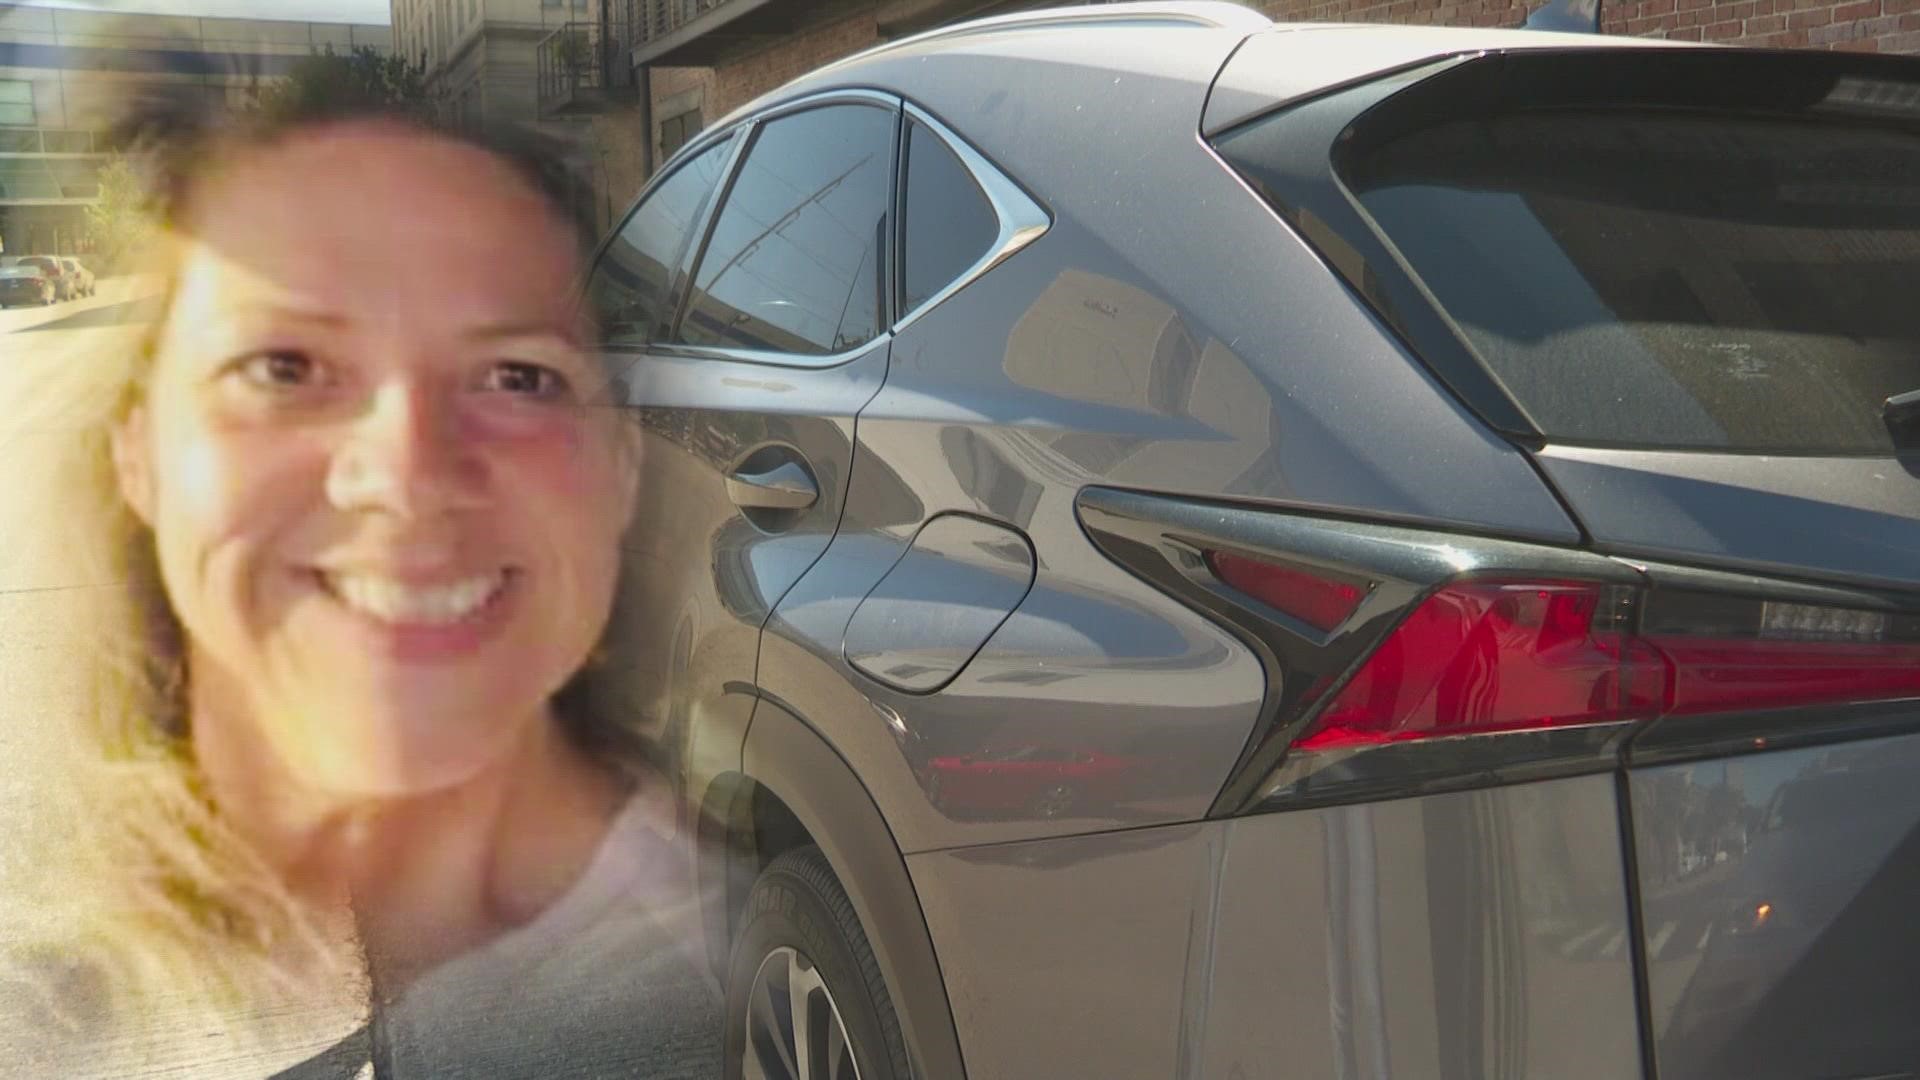 Sixth-grade teacher Michelle Reynolds' grey Lexus SUV was found parked in New Orleans, 360 miles from her Texas home.